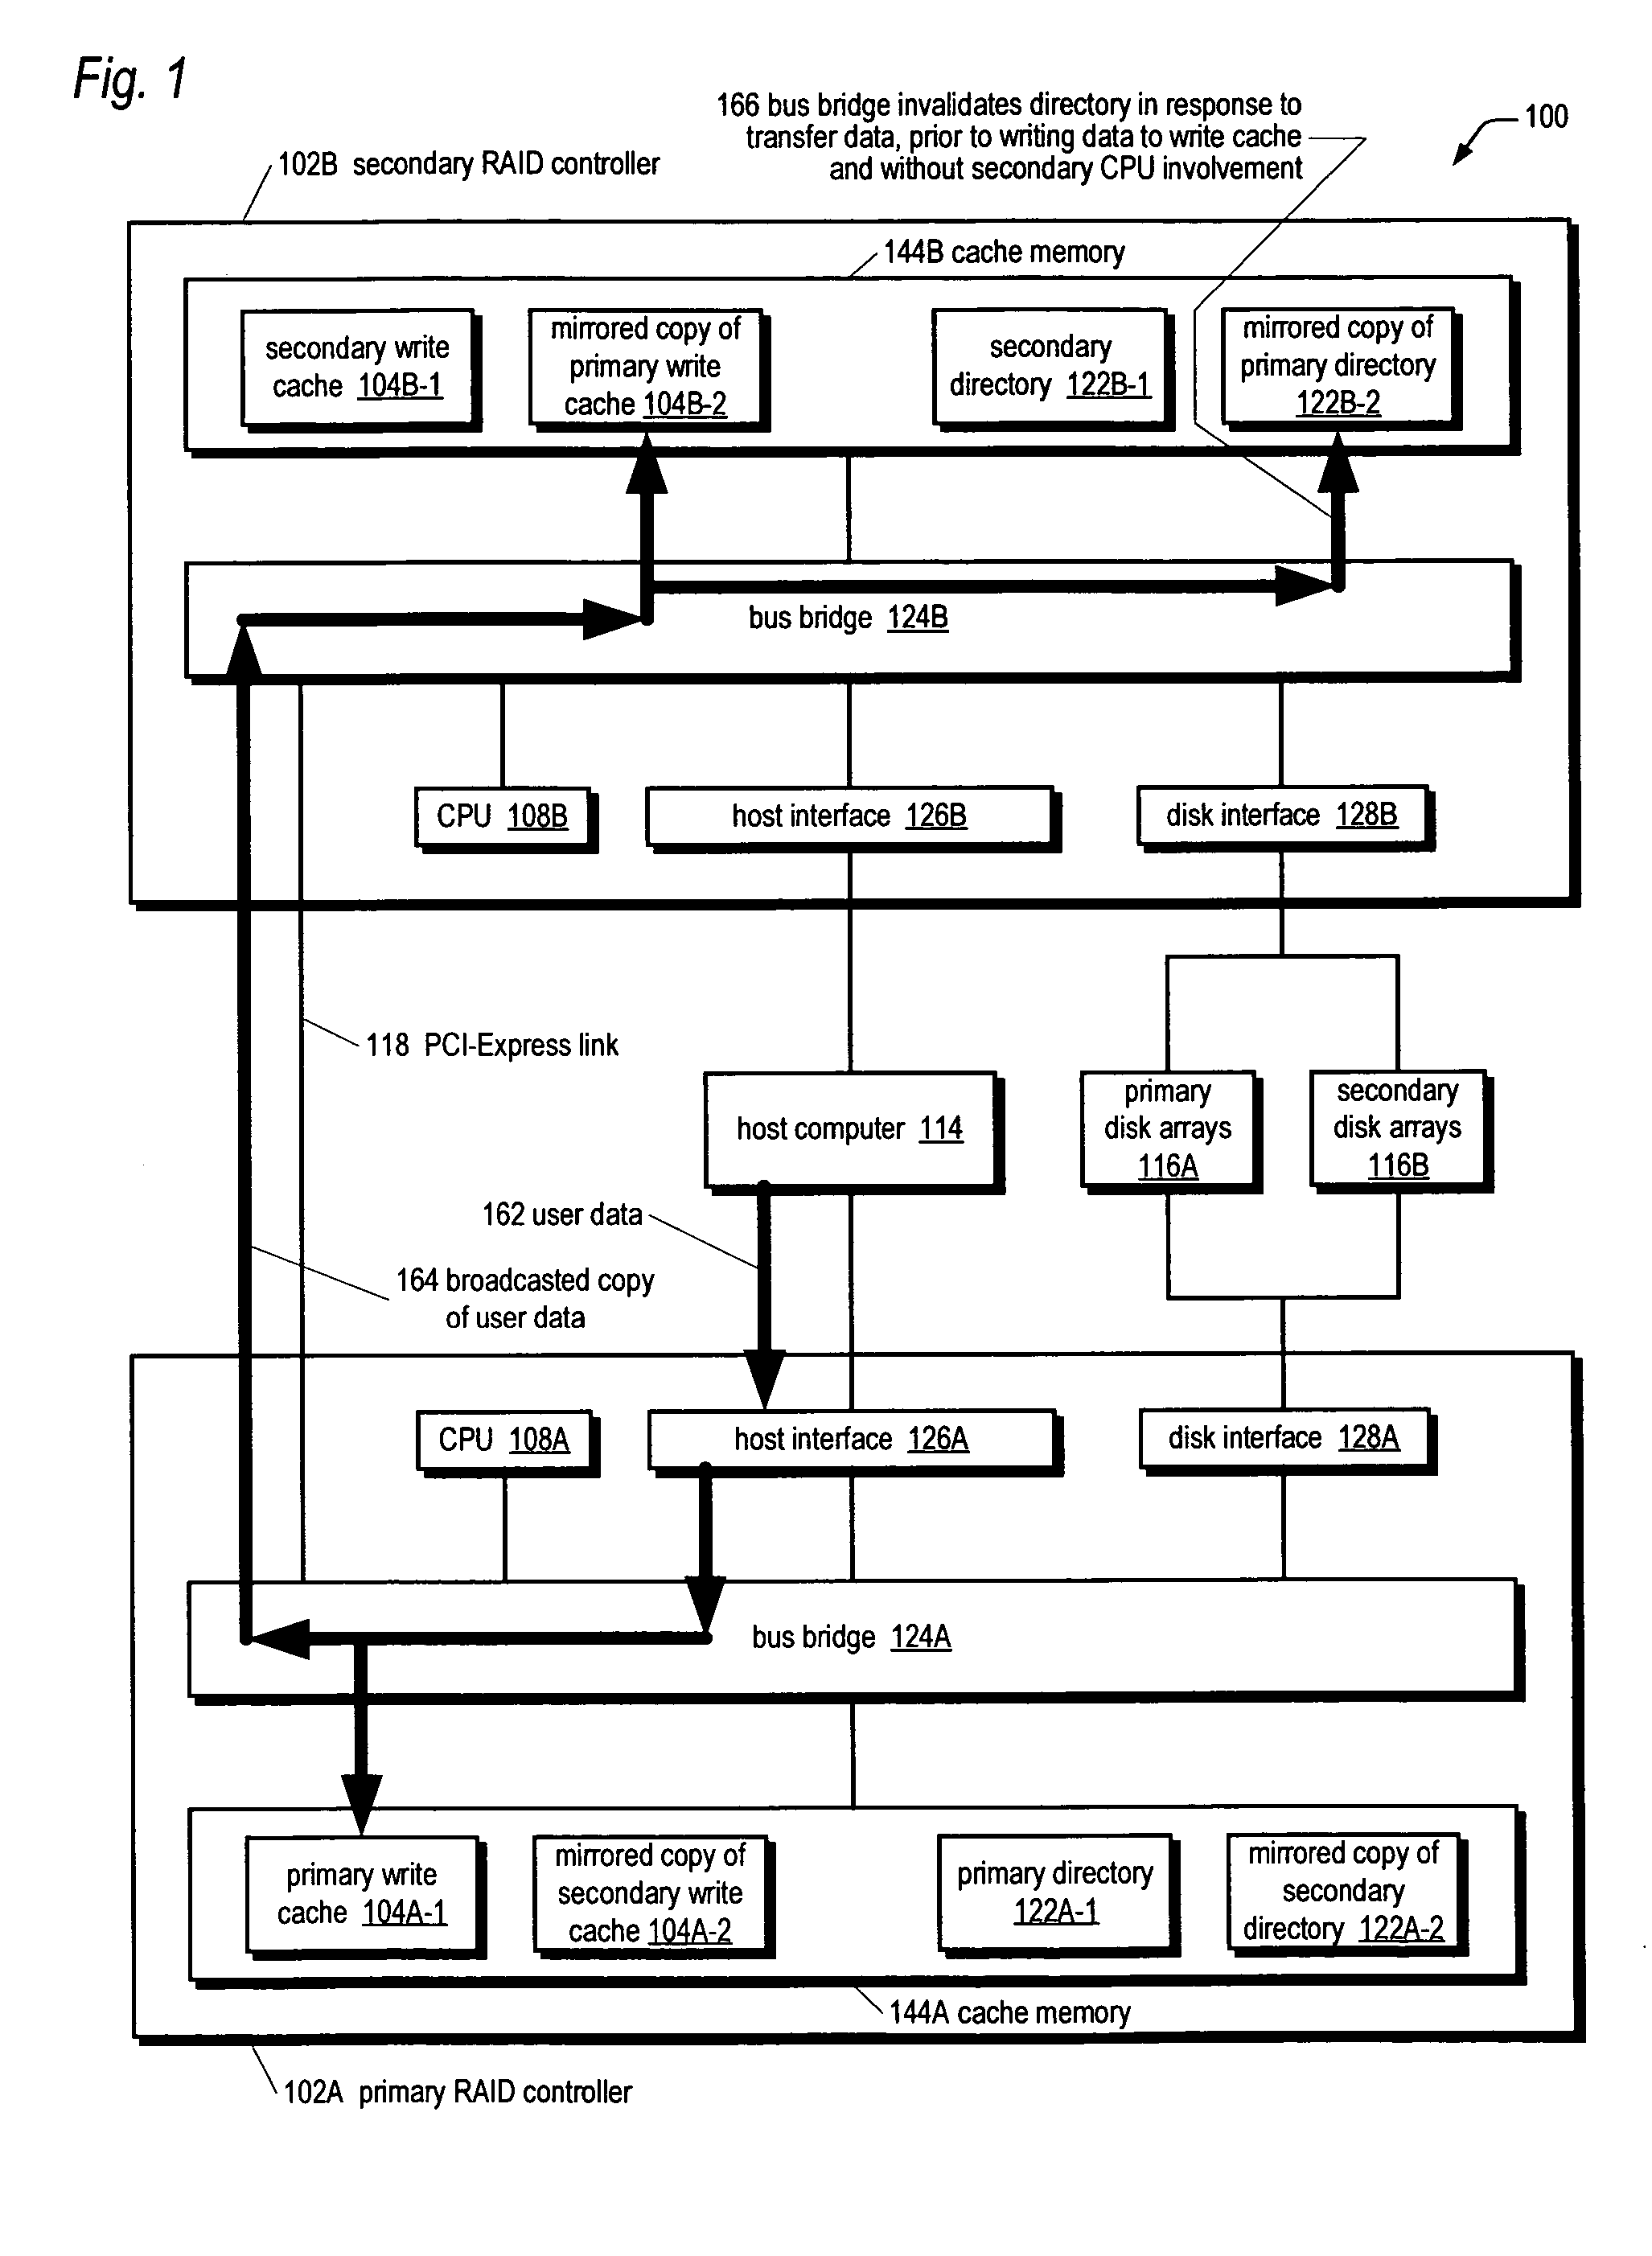 RAID system for performing efficient mirrored posted-write operations